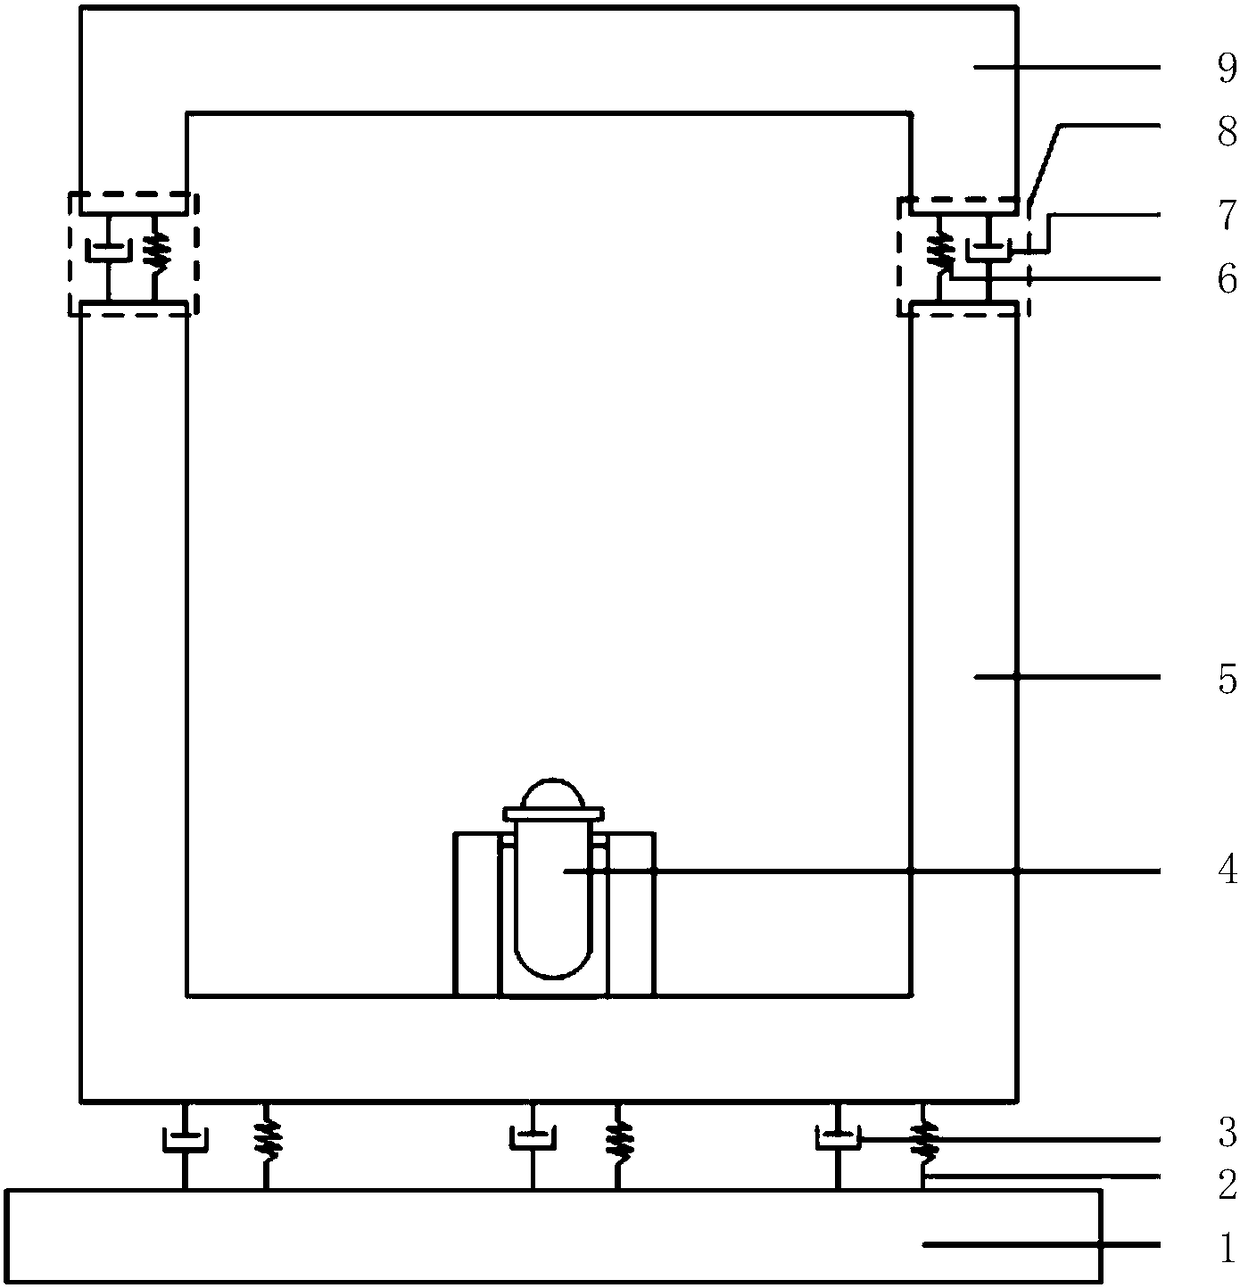 Base isolation-tuned mass damper shock isolation and vibration absorption device for nuclear power plant without earthquake risk